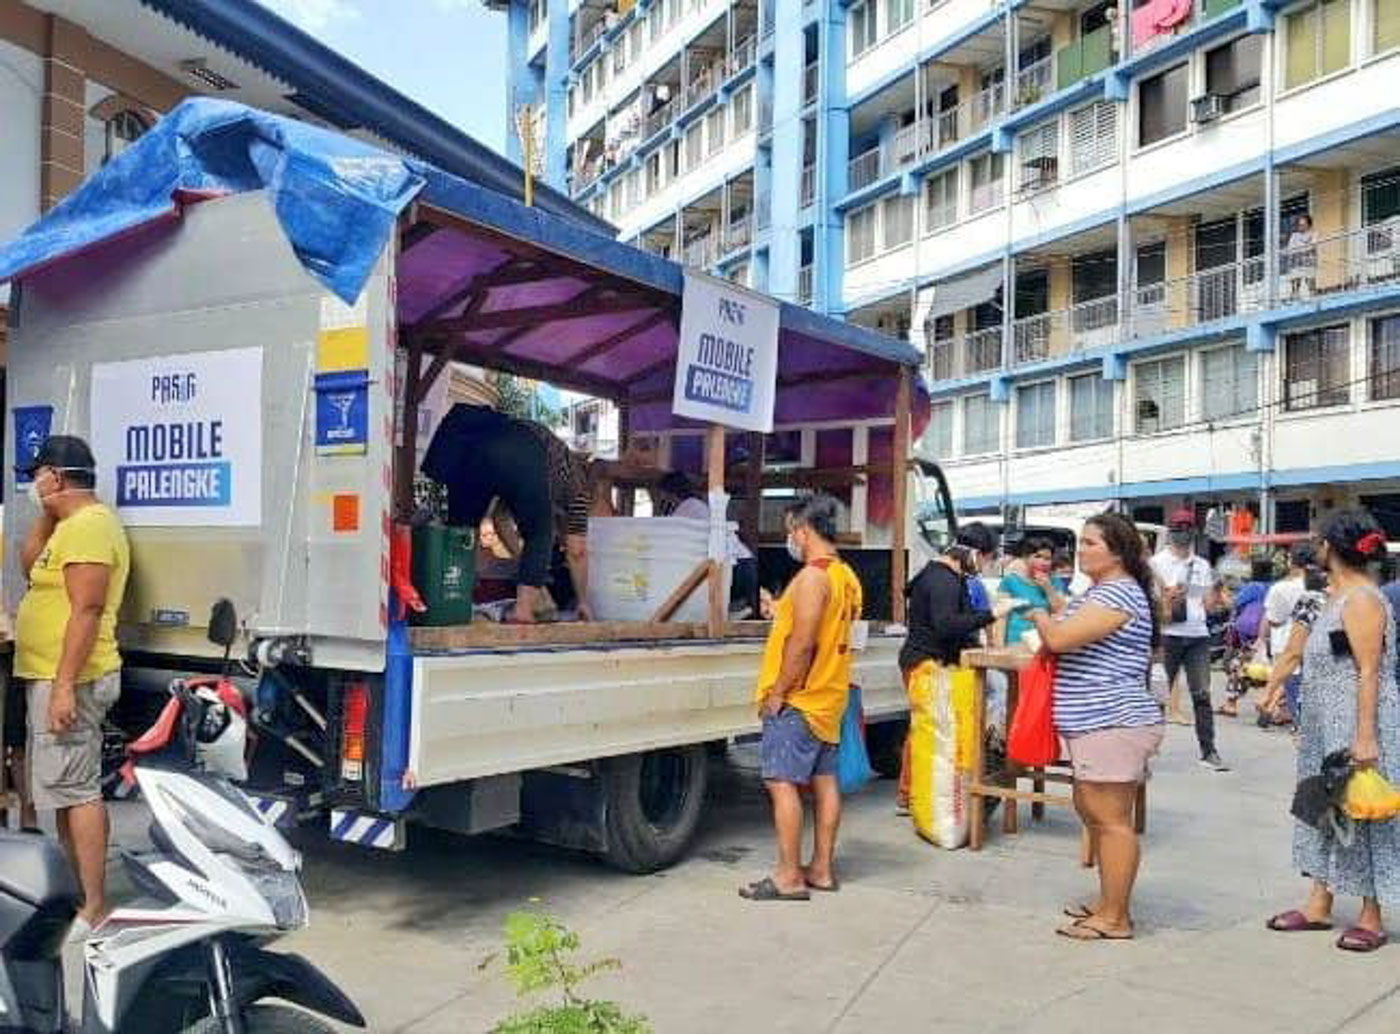 ROVING STORES. The Pasig City government launches a "Mobile Palengke" effort to cut the need for people to leave their homes during the coronavirus lockdown. Photo from Pasig Mayor Vico Sotto's Twitter page 